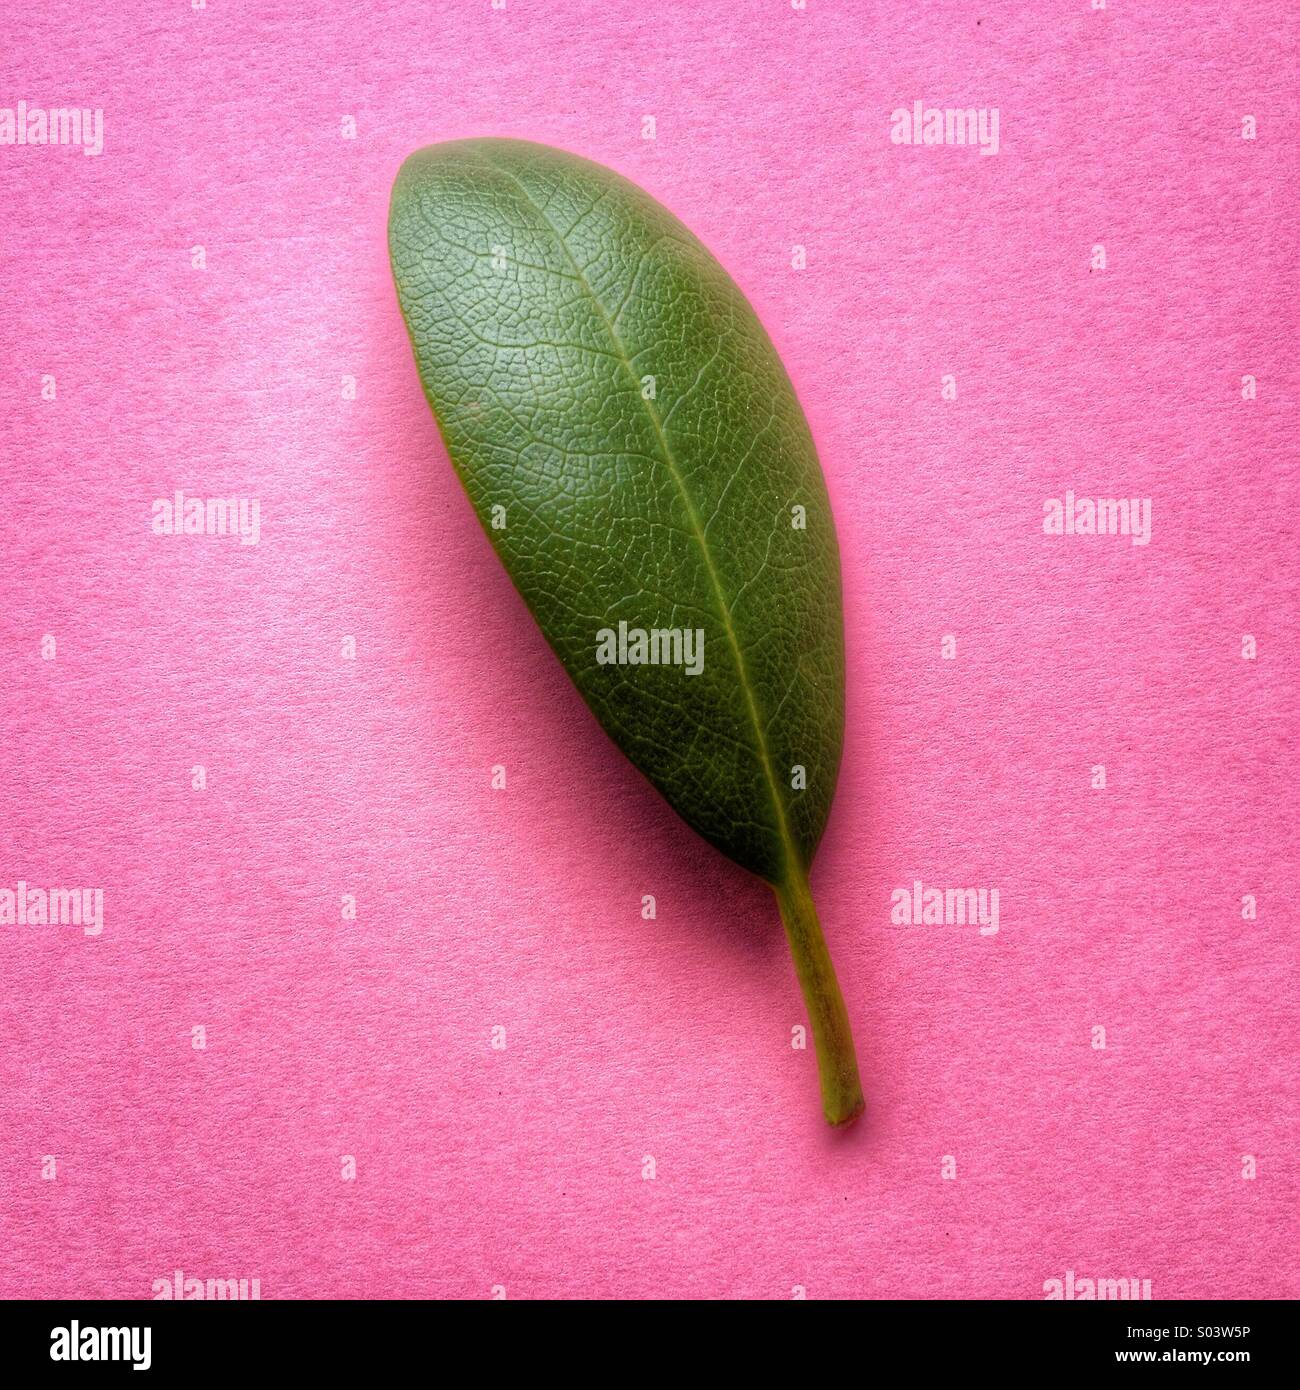 Rhododendron leaf Stock Photo